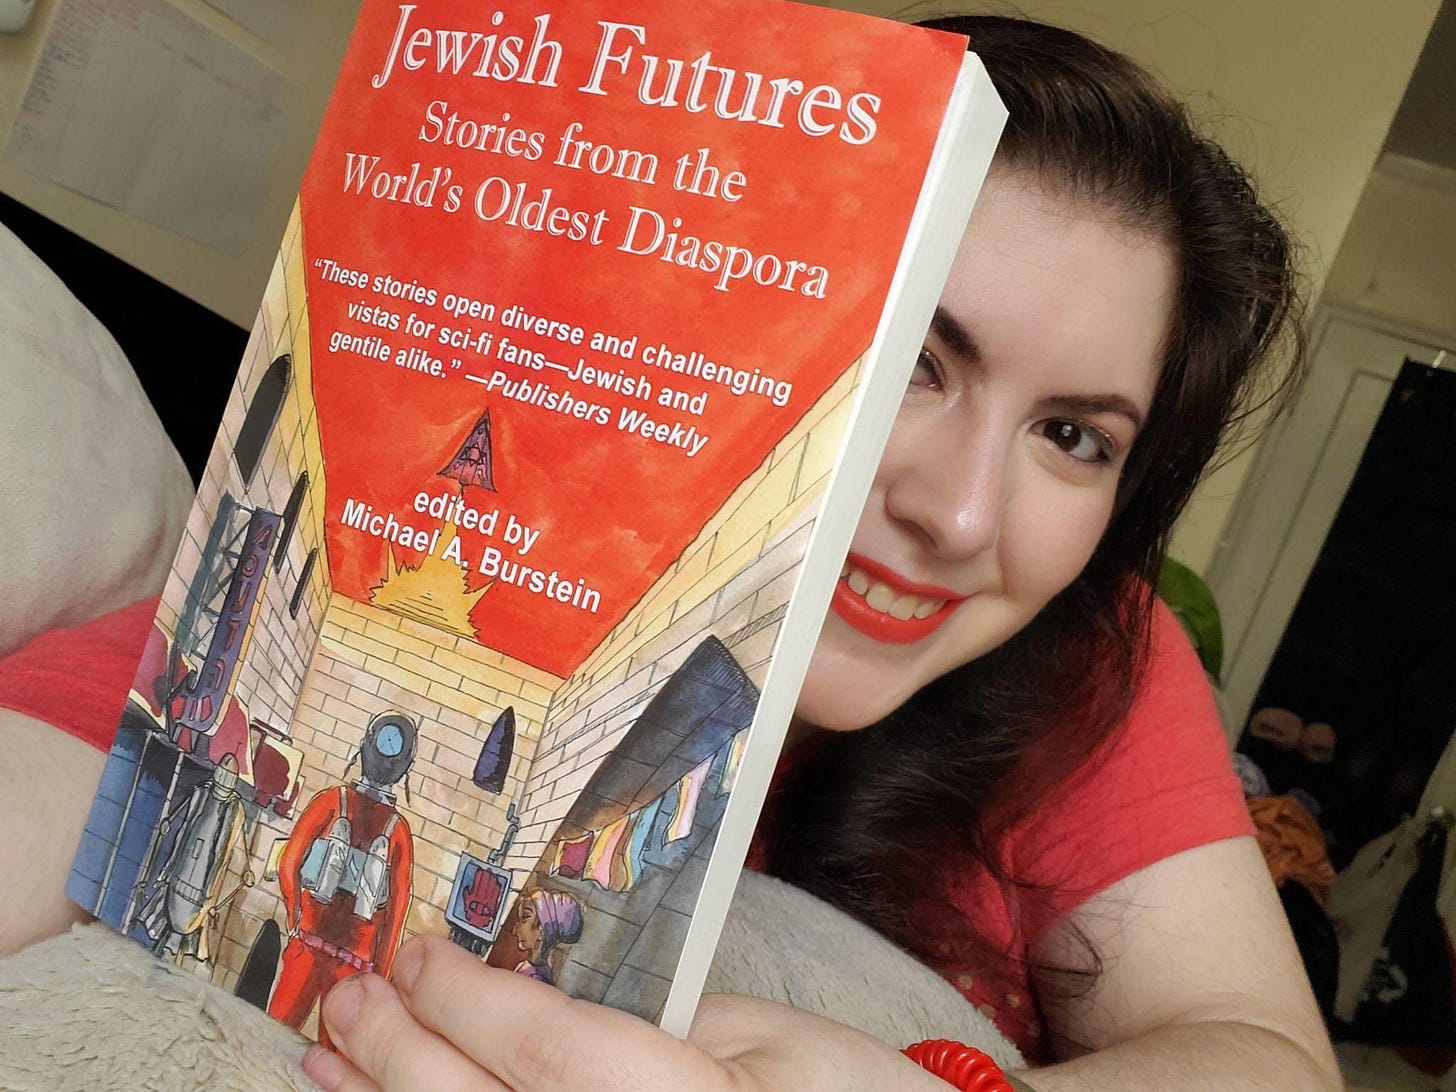 May be an image of 1 person and text that says 'Stories Jewish Futures World's Oldest Diaspora from the These stories open diverse and gentile vistas for alike. sci-fi Publishers fans-Jewish Jewish Weekly challenging and Michael A. edited by Burstein'